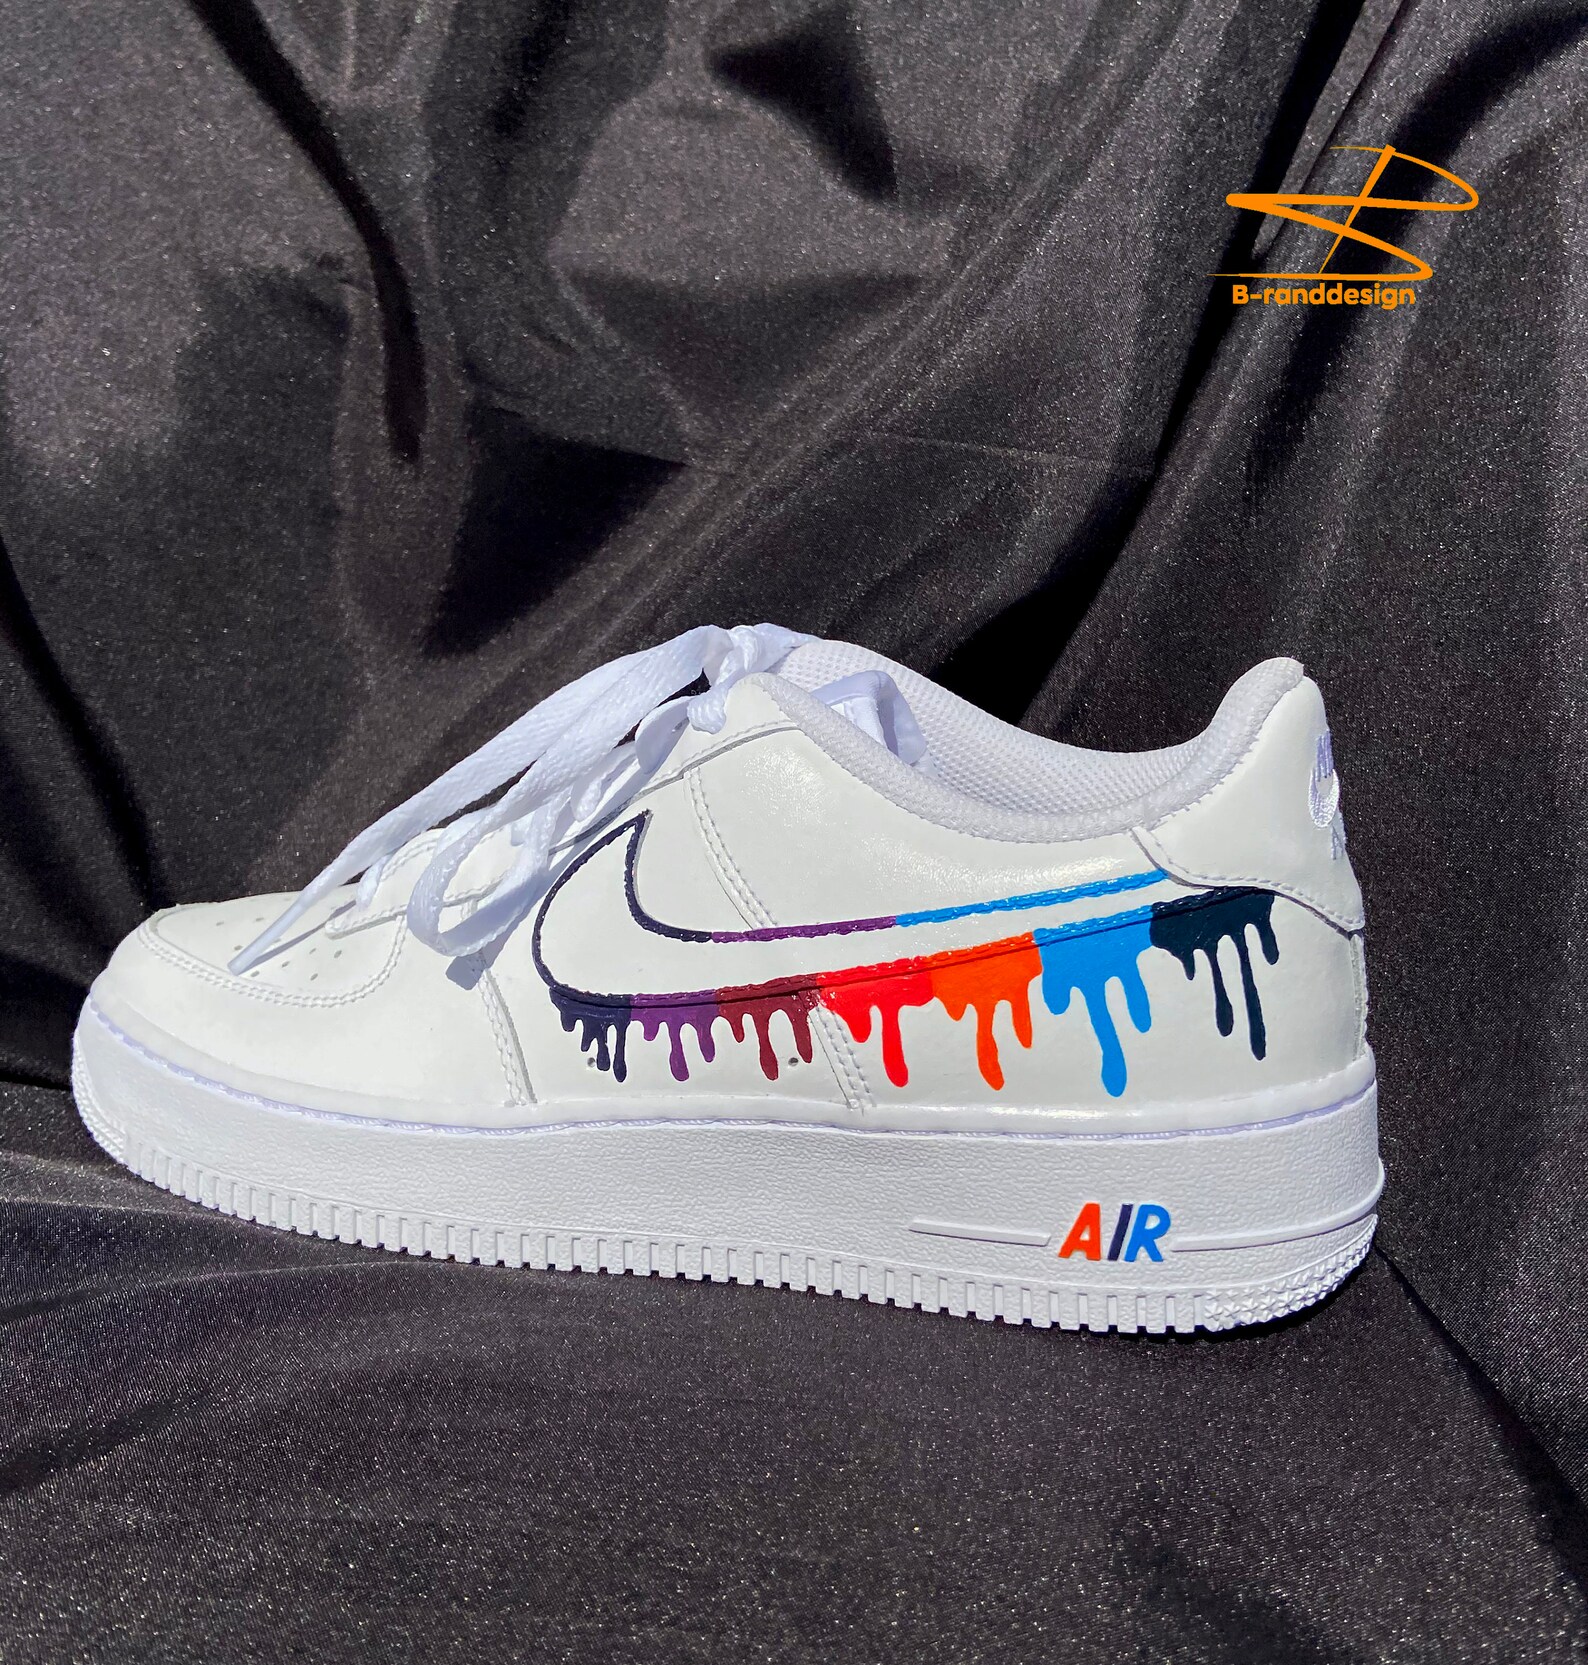 Custom Nike Air Force 1 Dripped Design as You Wish | Etsy